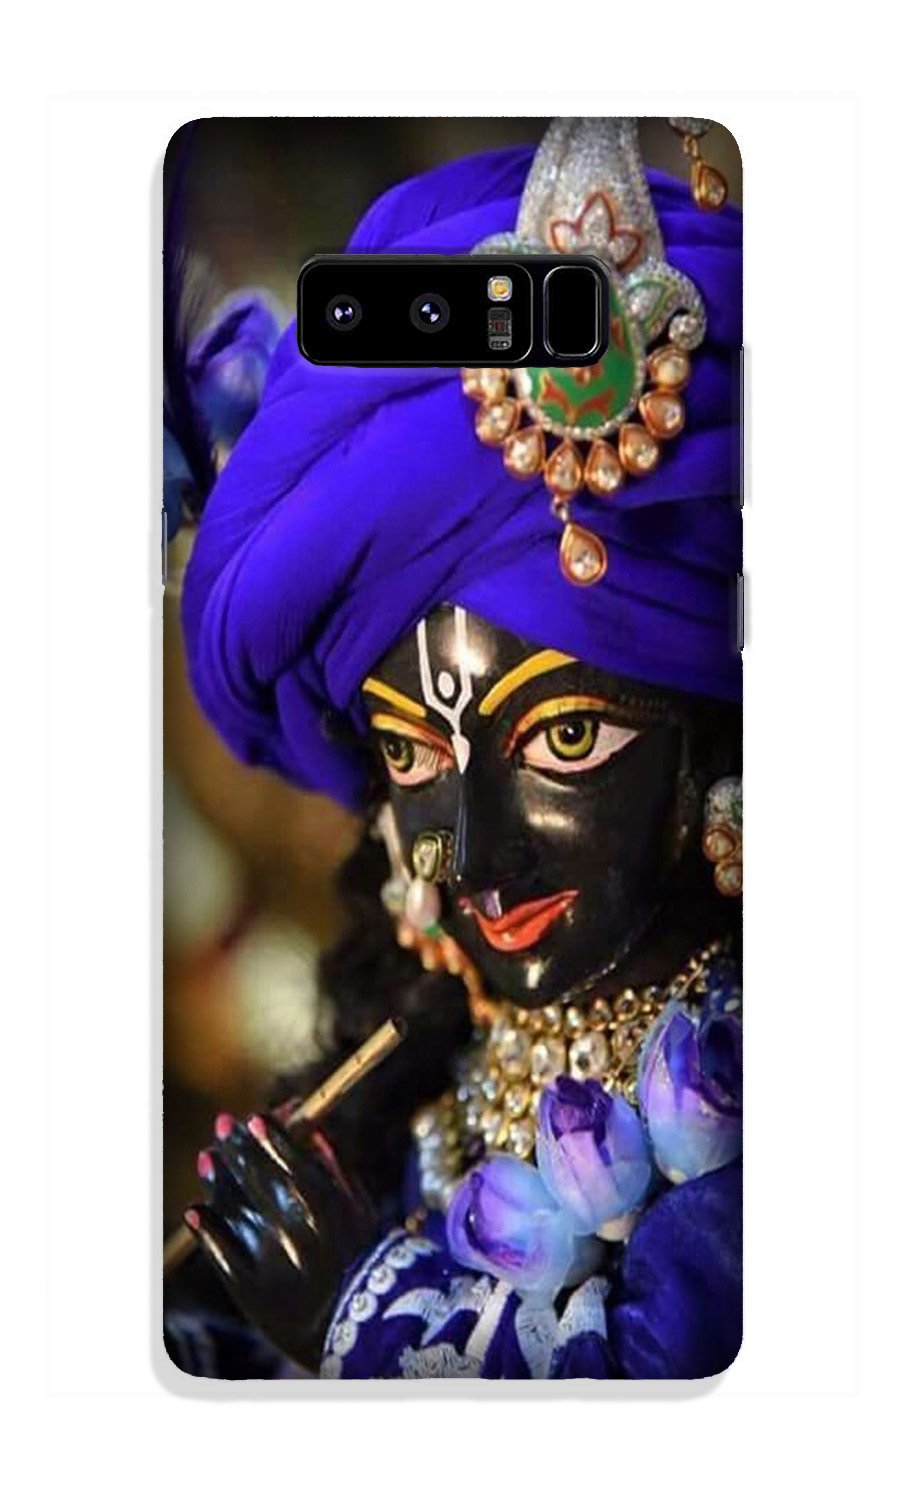 Lord Krishna4 Case for Galaxy Note 8